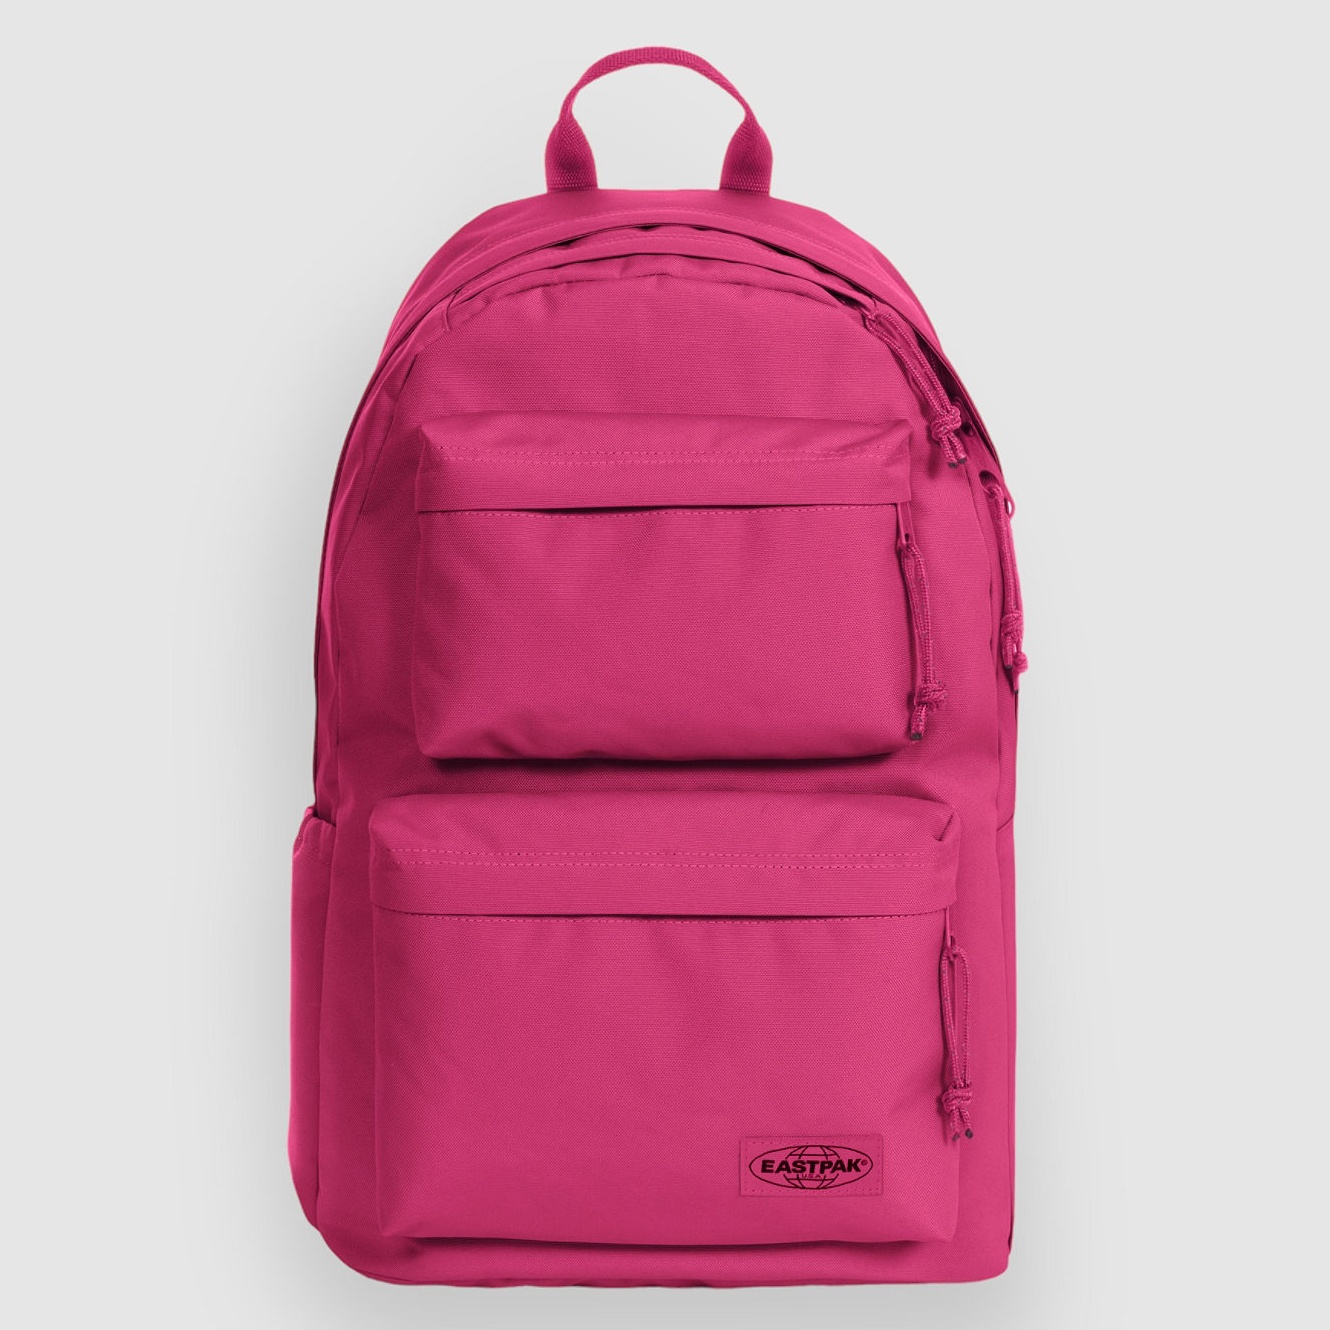 Eastpak Padded Double Lush Granate Sac a dos